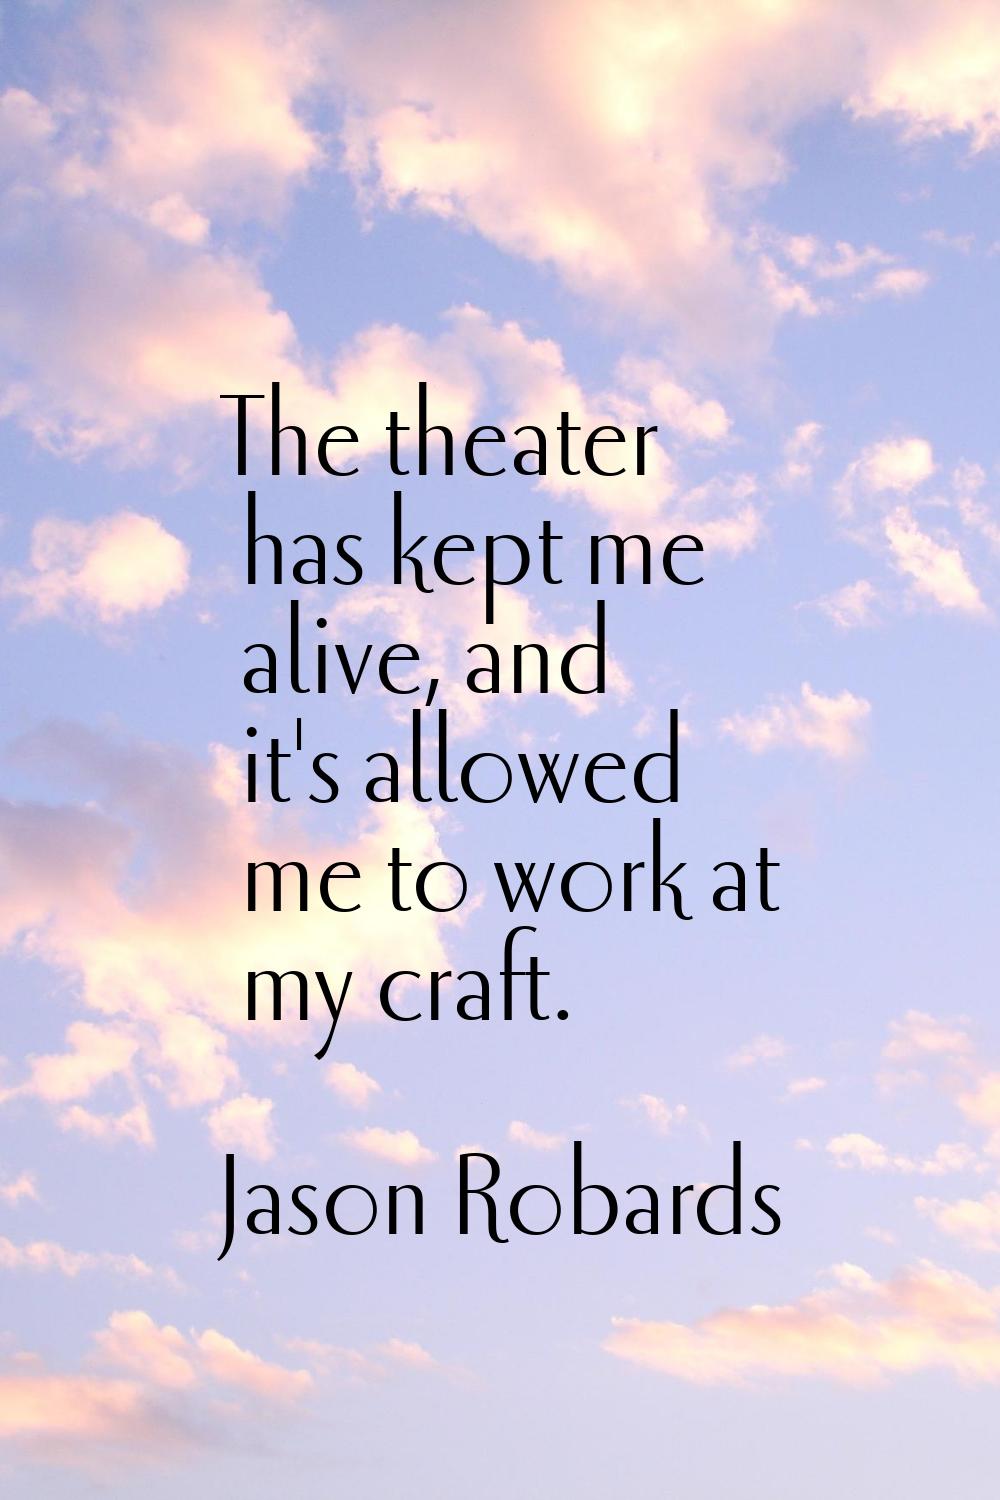 The theater has kept me alive, and it's allowed me to work at my craft.